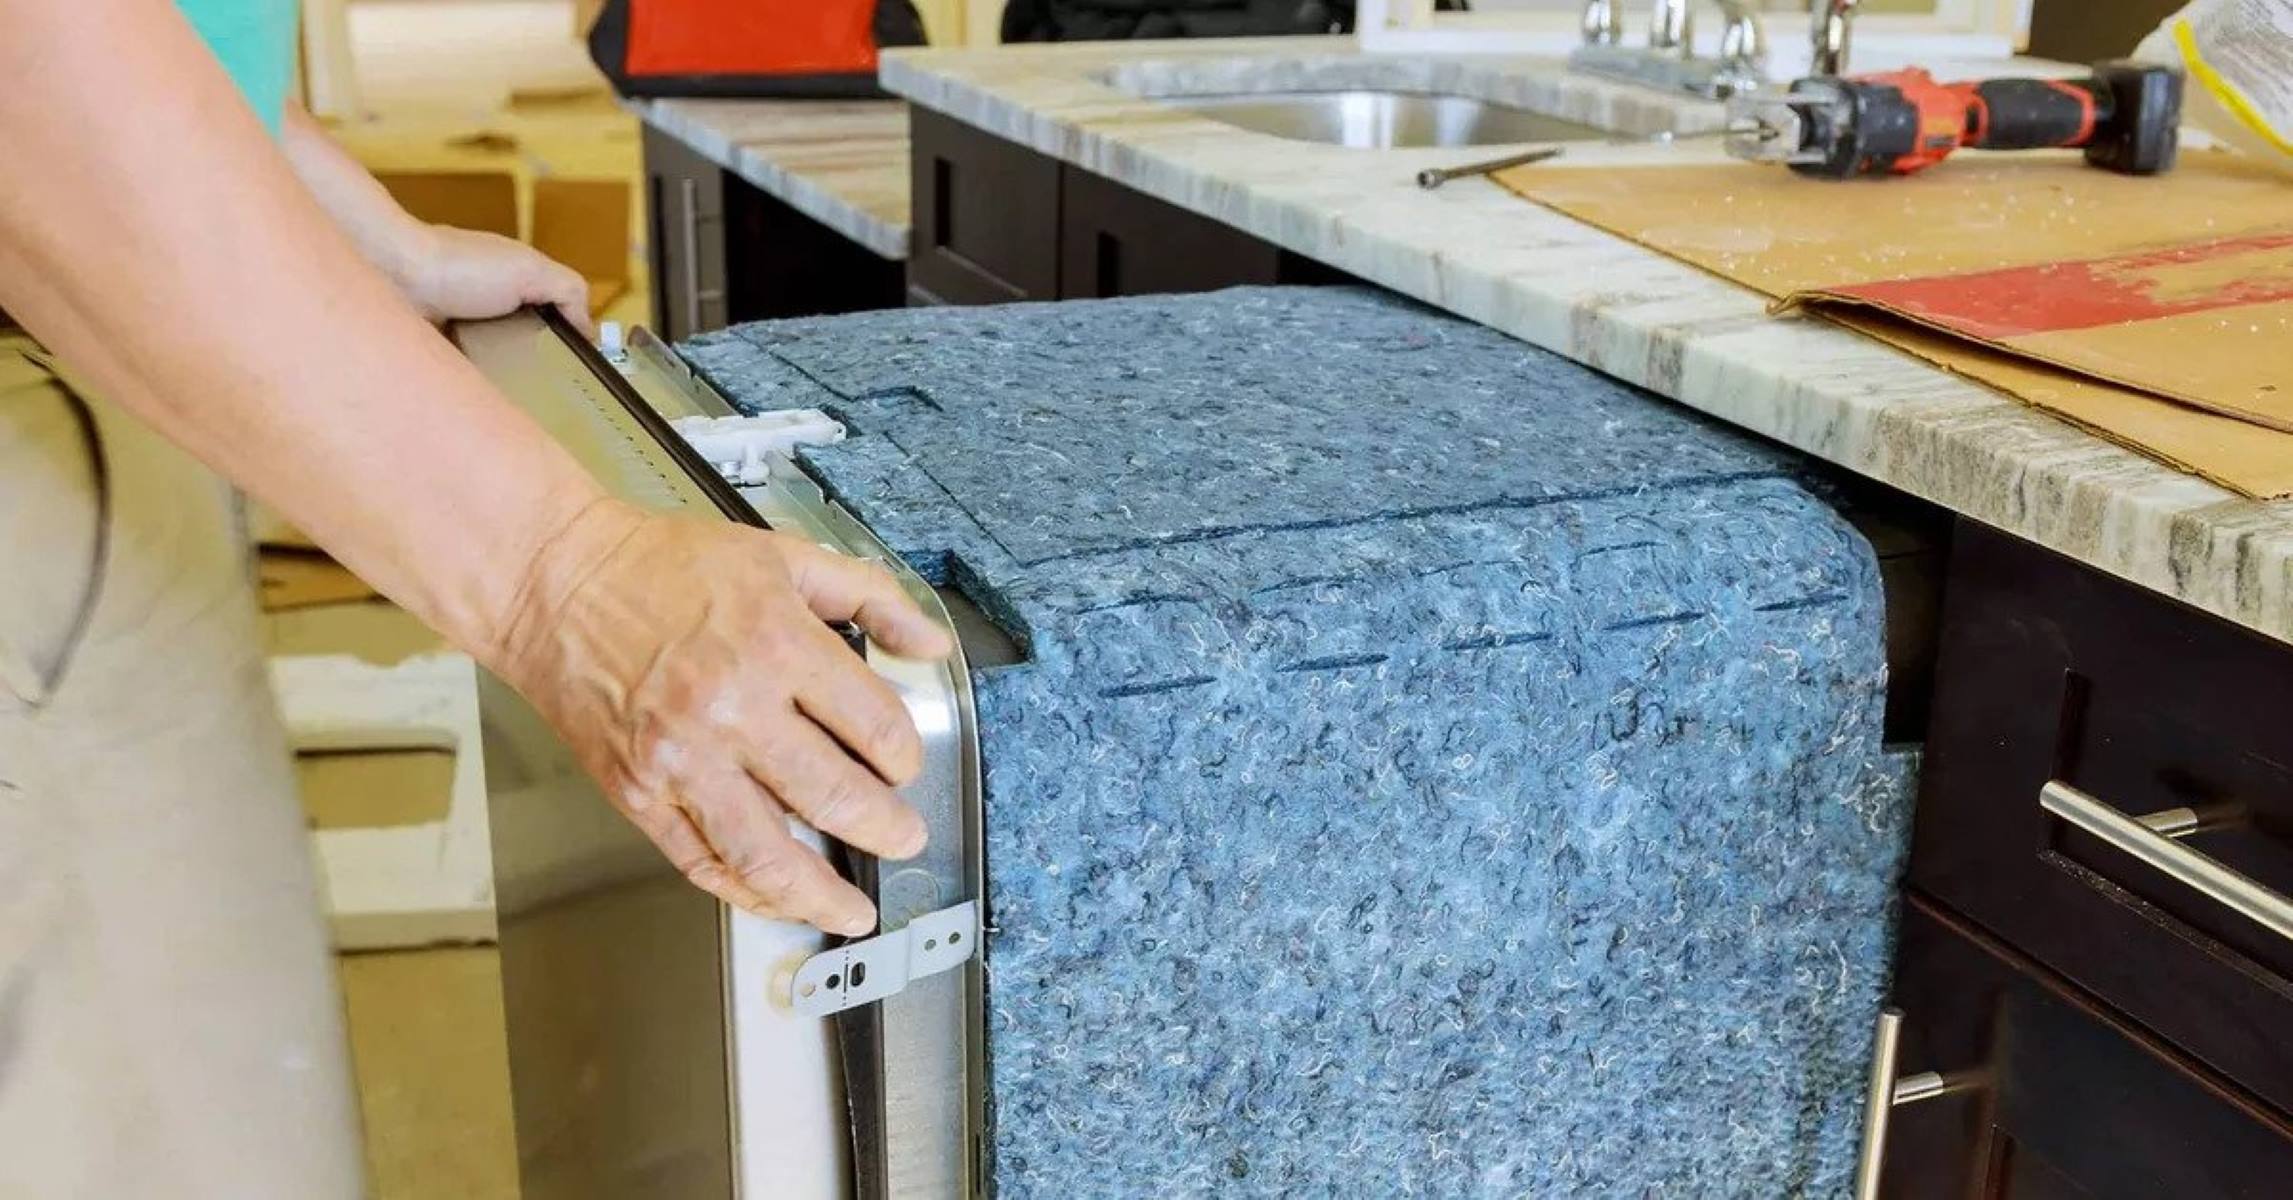 How To Mount Dishwasher With Granite Countertops